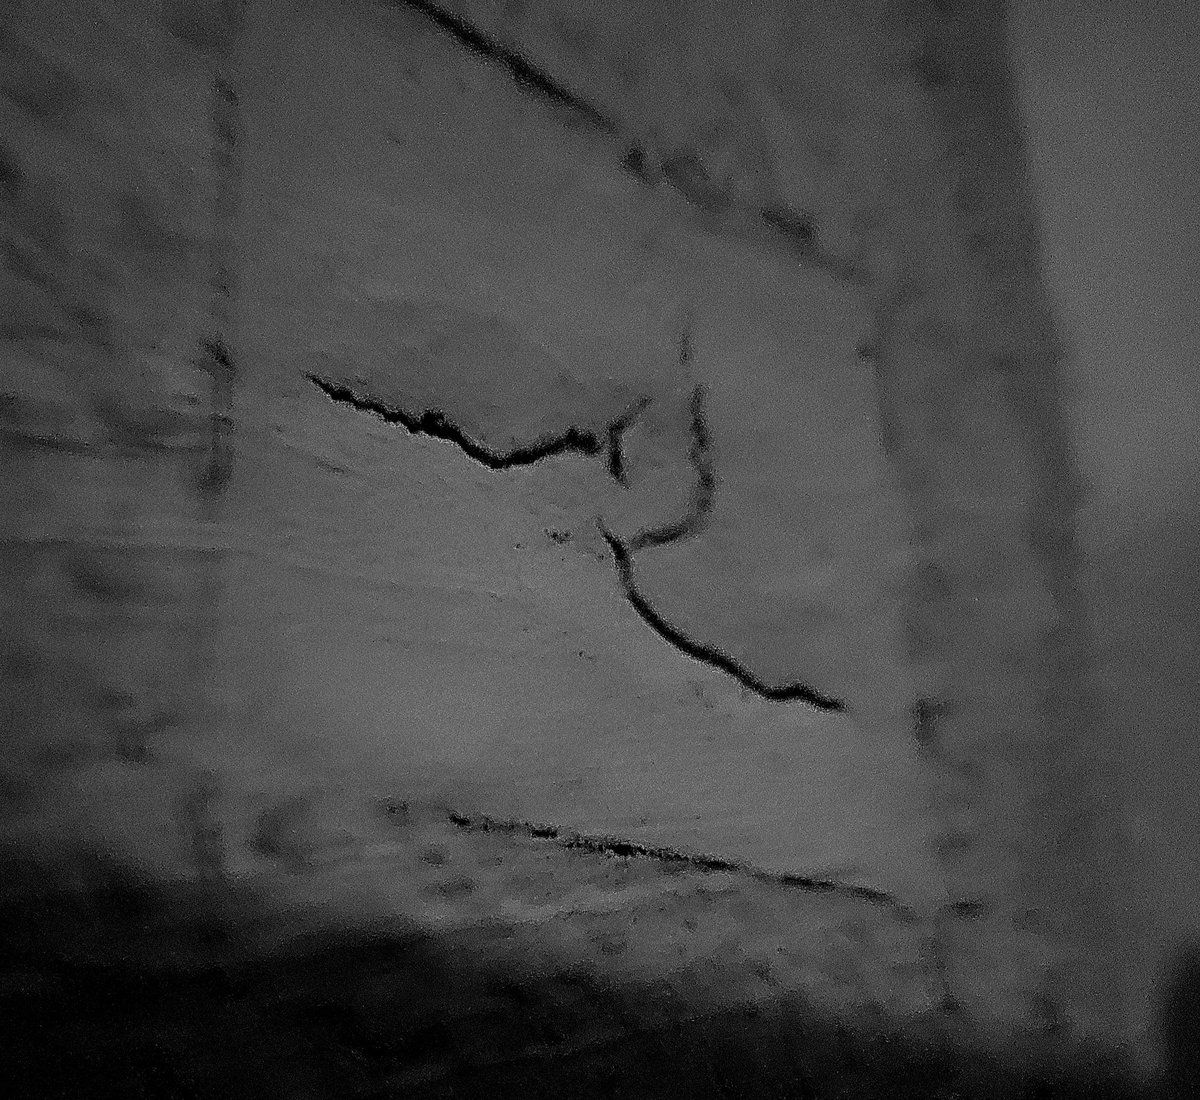 ⬛️⬜️ 'the hurt and the anger, and the joy of the pain.' (difford/tilbrook) #photography #bnwphotography #blackandwhitephotography #originalphotography #abstractphotography #artphotography #trashphotography